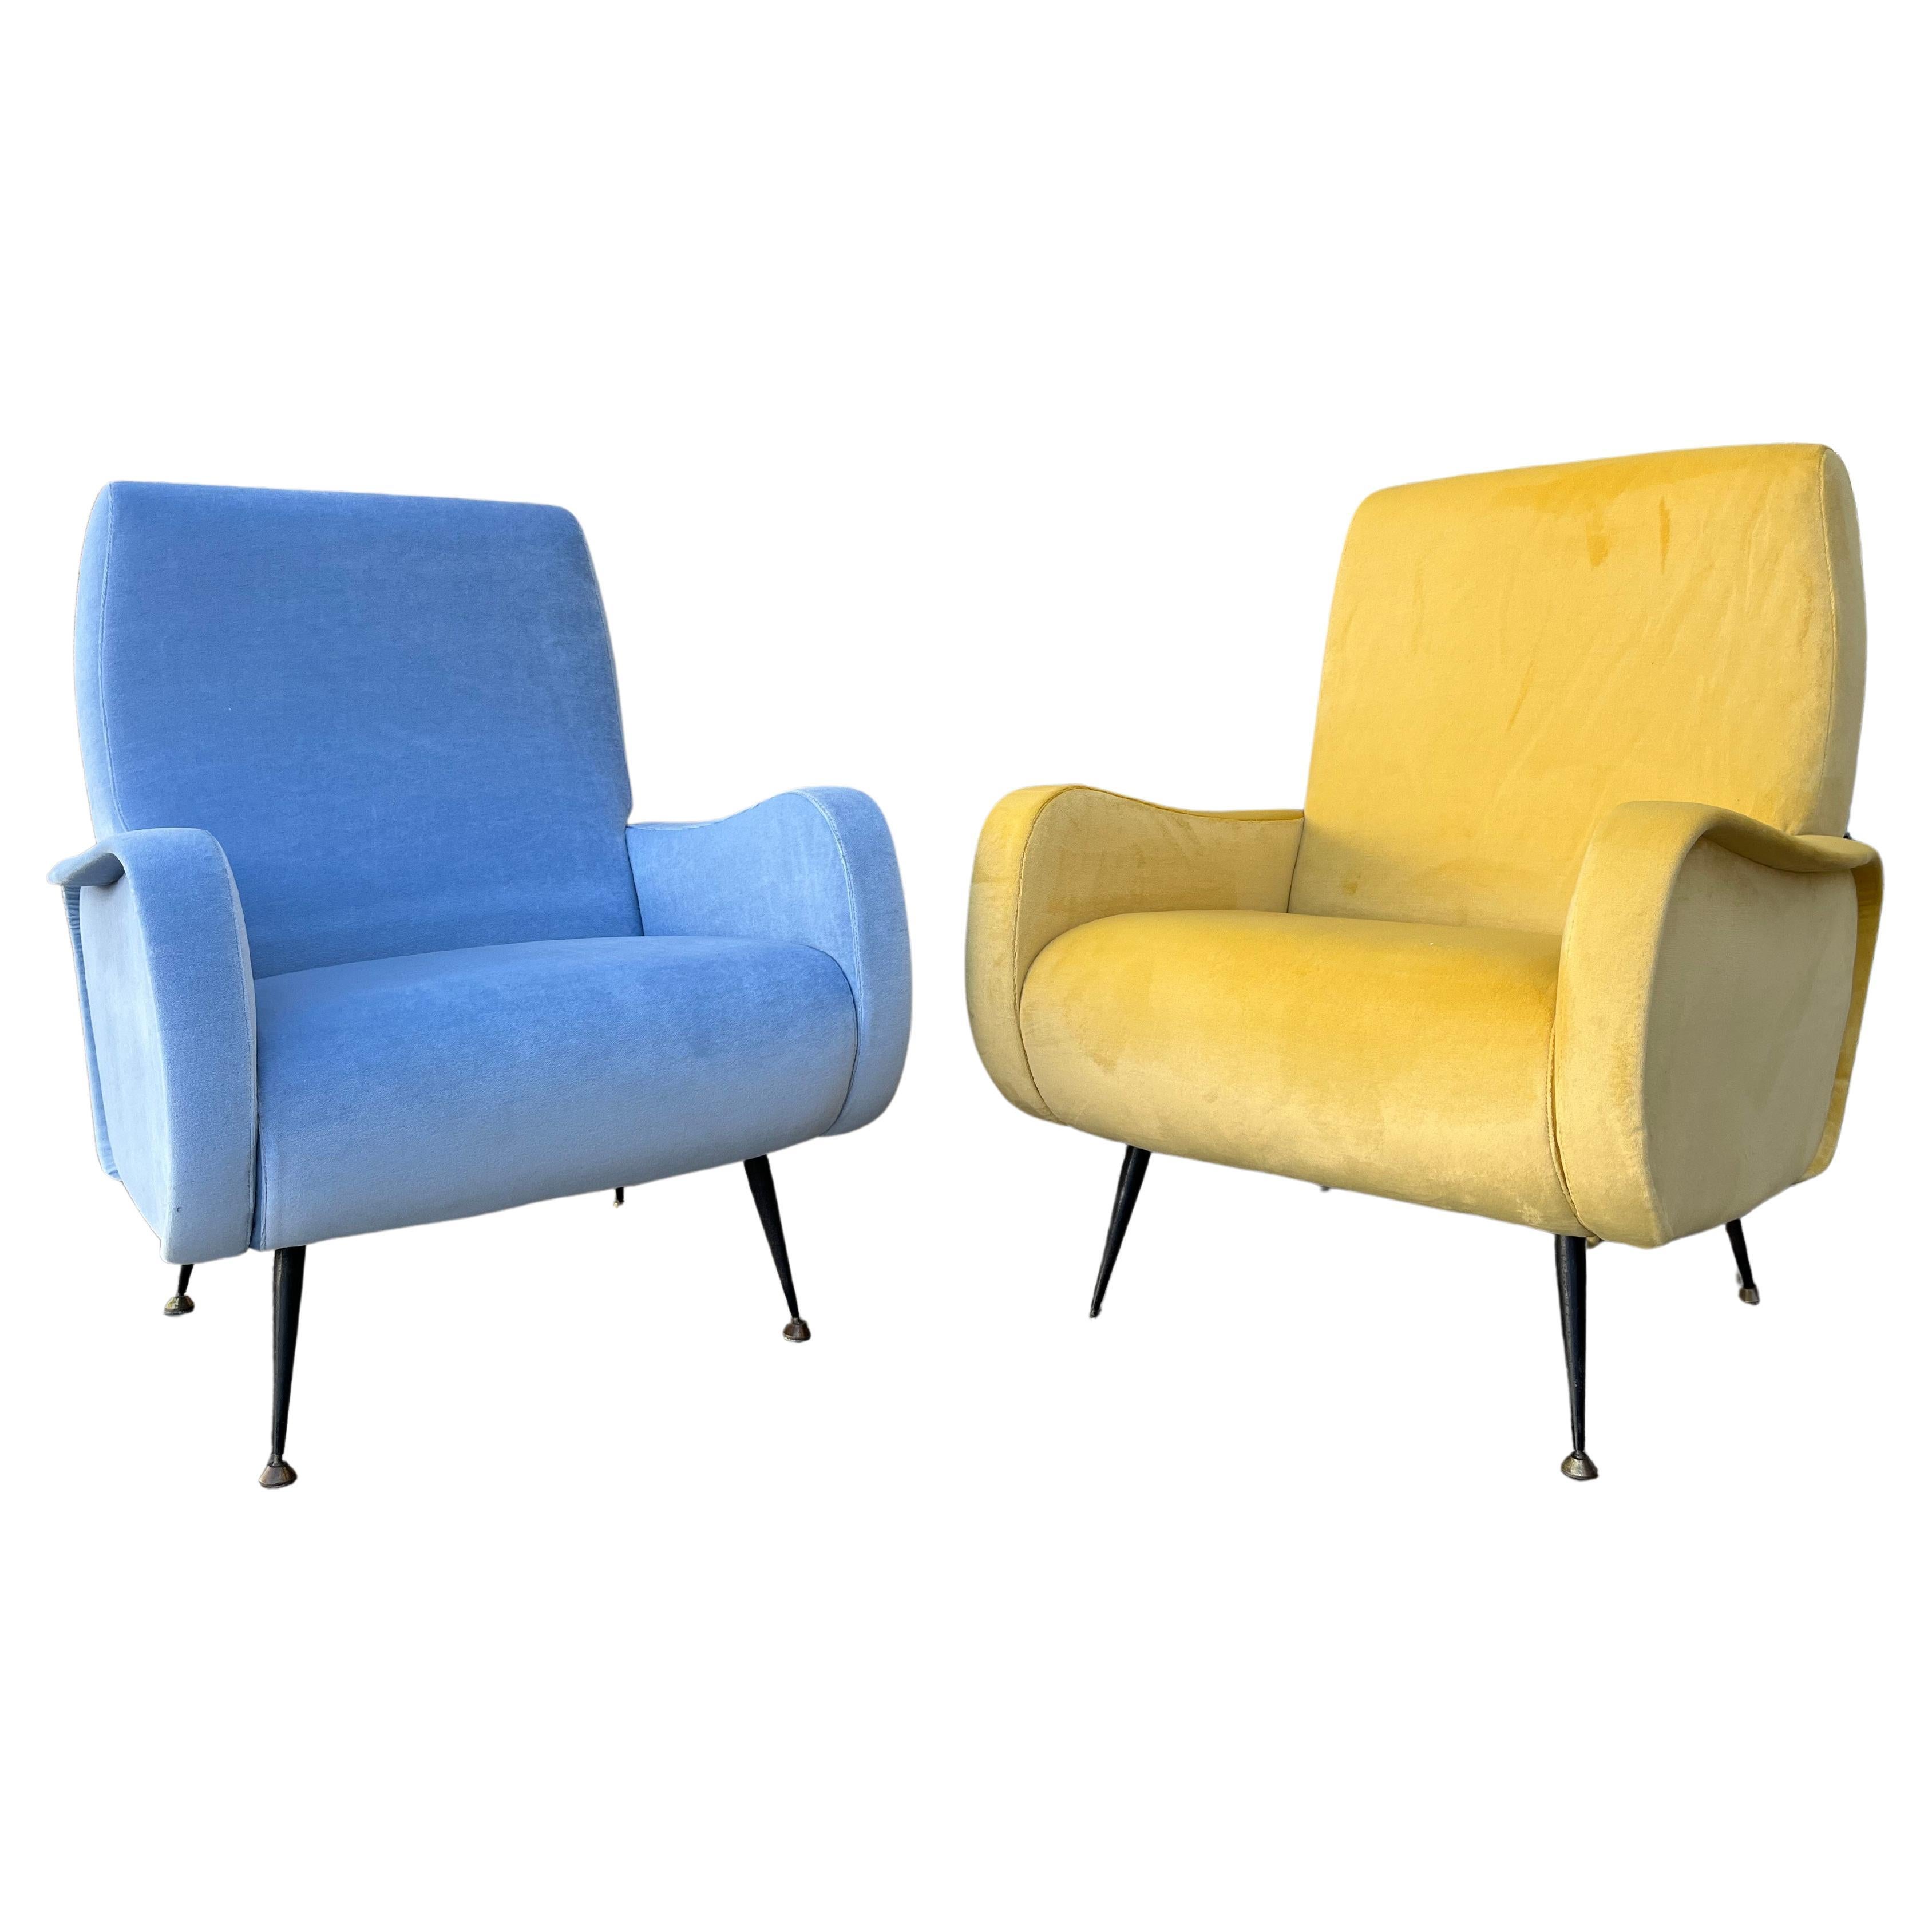 A Pair of Mid Century Modern Lady by Marco Zanuso. Circa 1950s For Sale